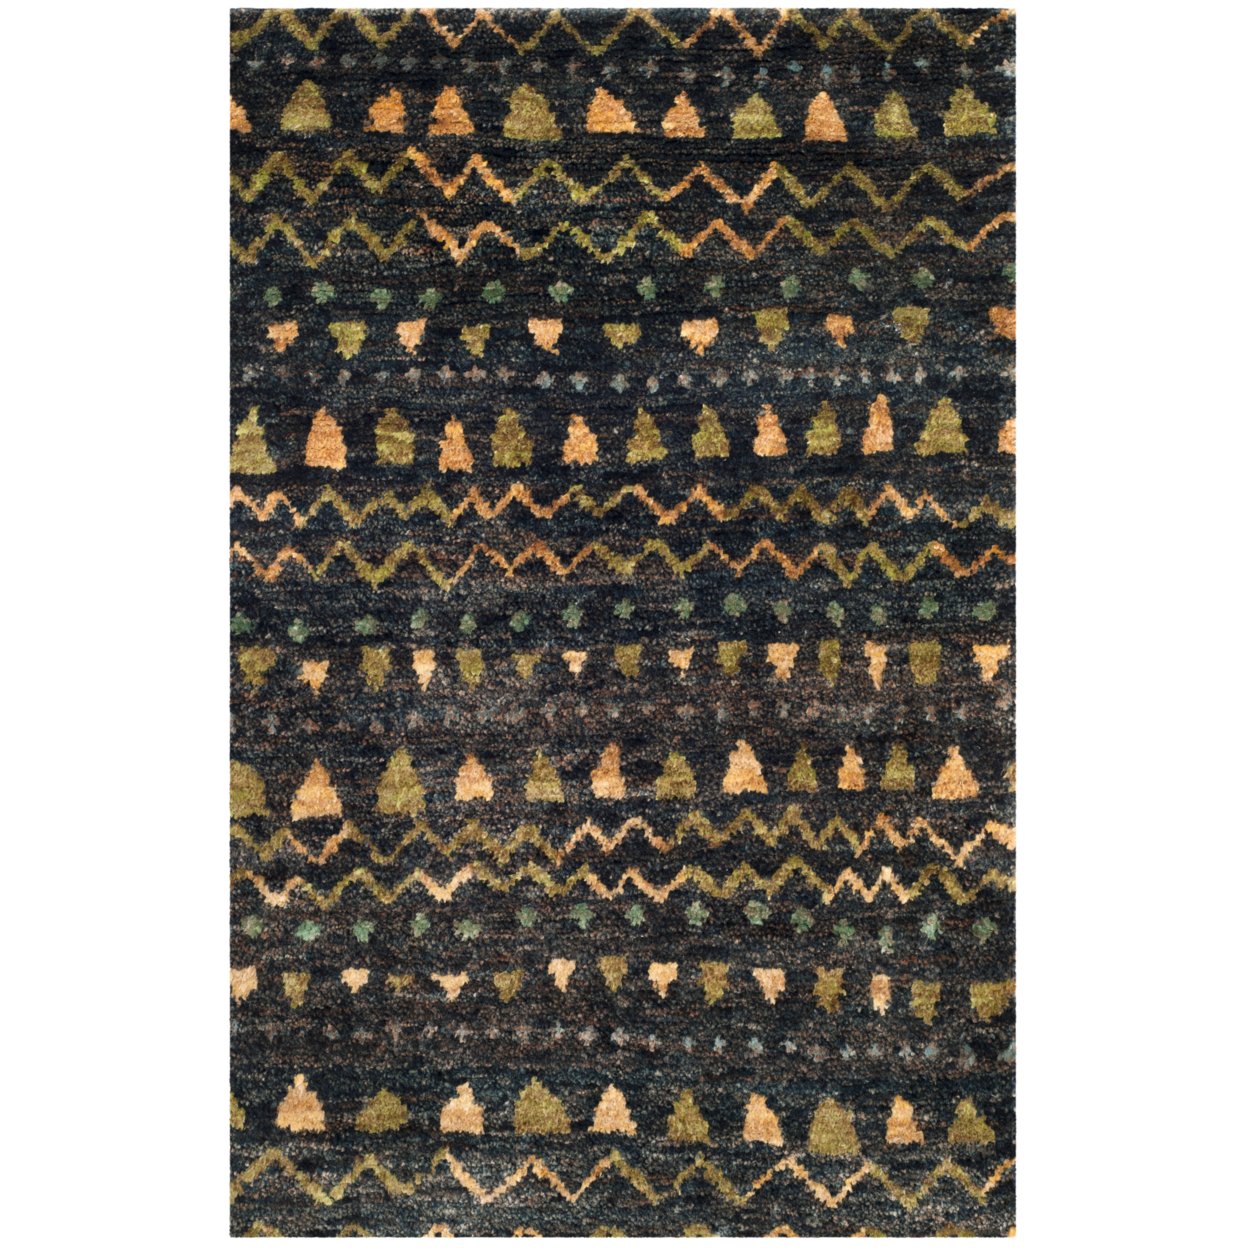 SAFAVIEH Bohemian BOH653A Hand-knotted Black / Gold Rug - 5' X 8'